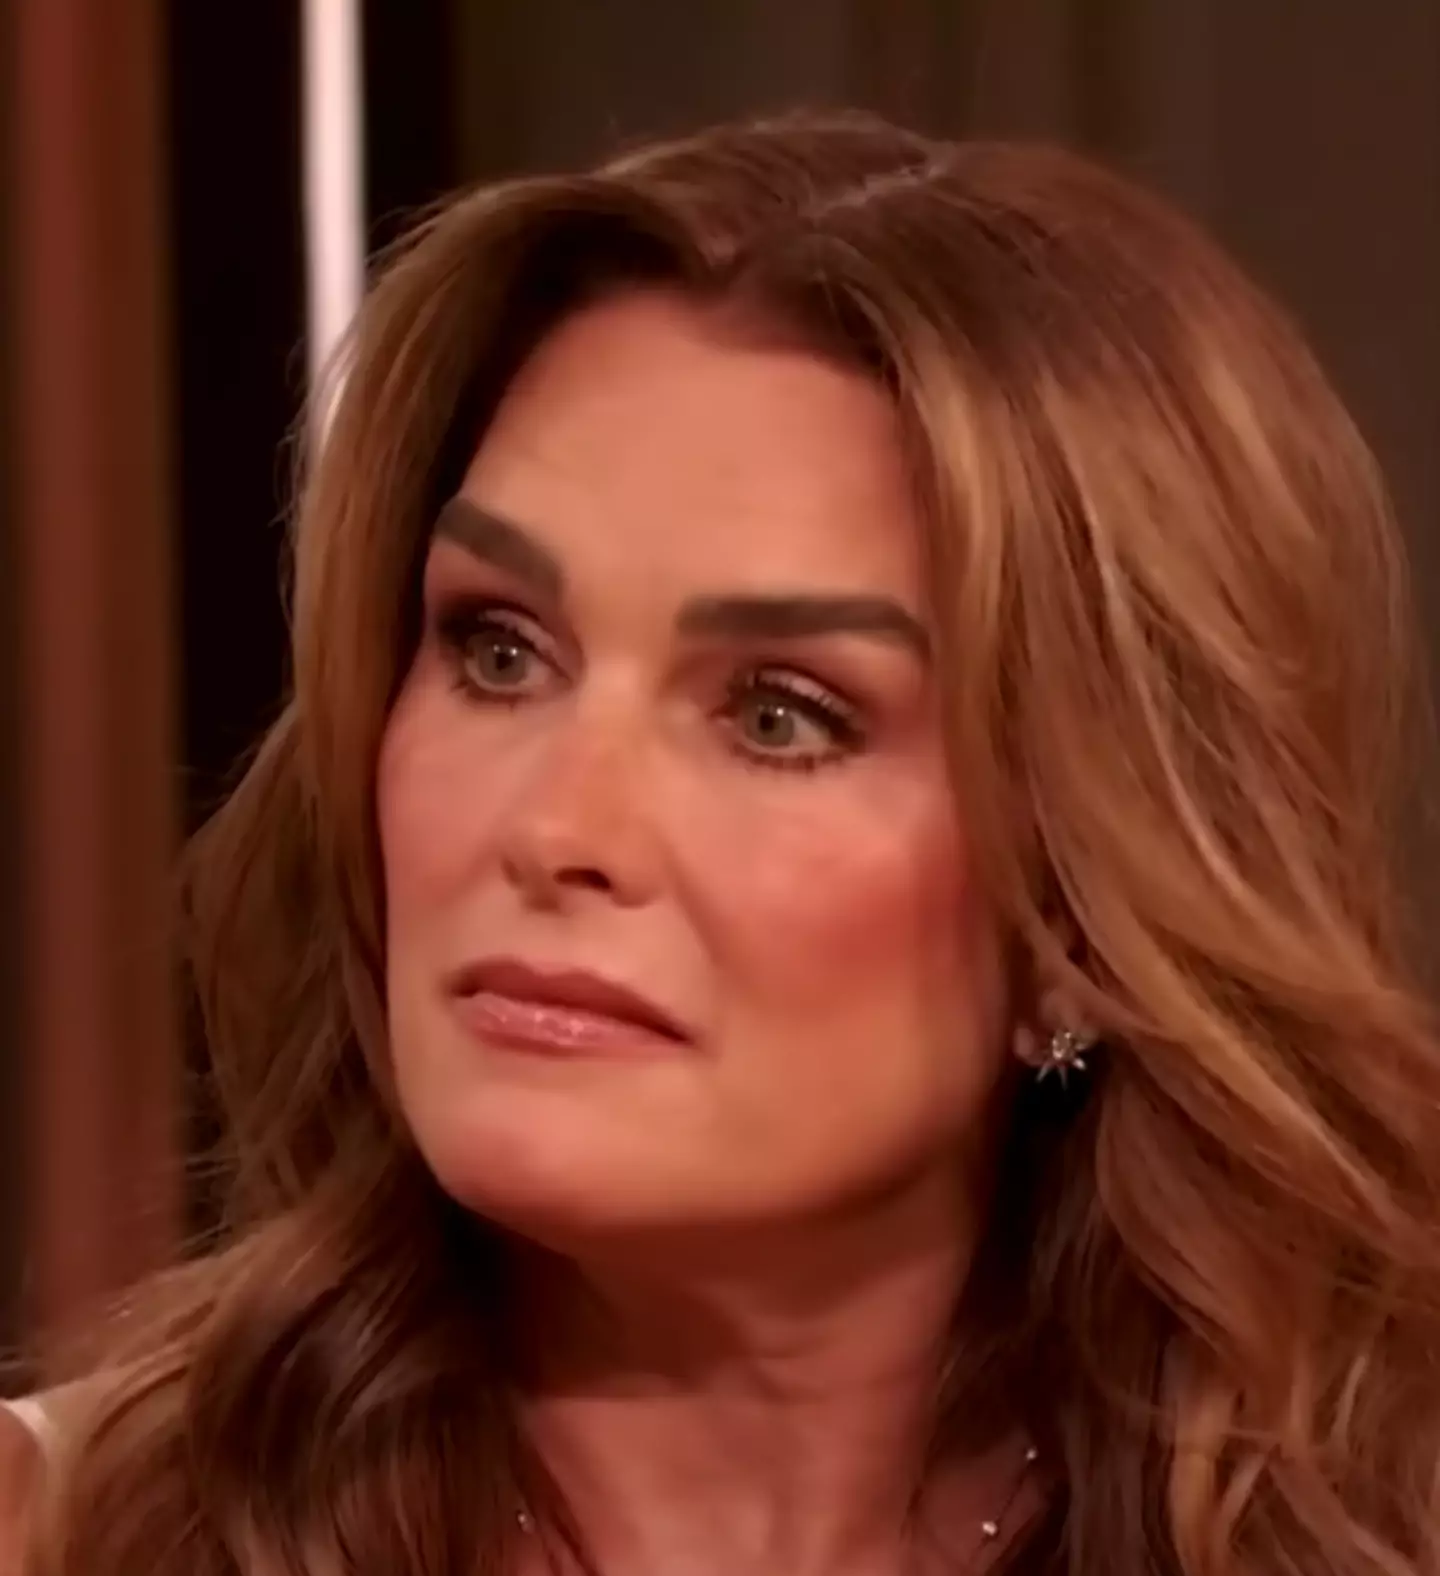 Brooke Shields and Drew Barrymore spoke about their mothers.